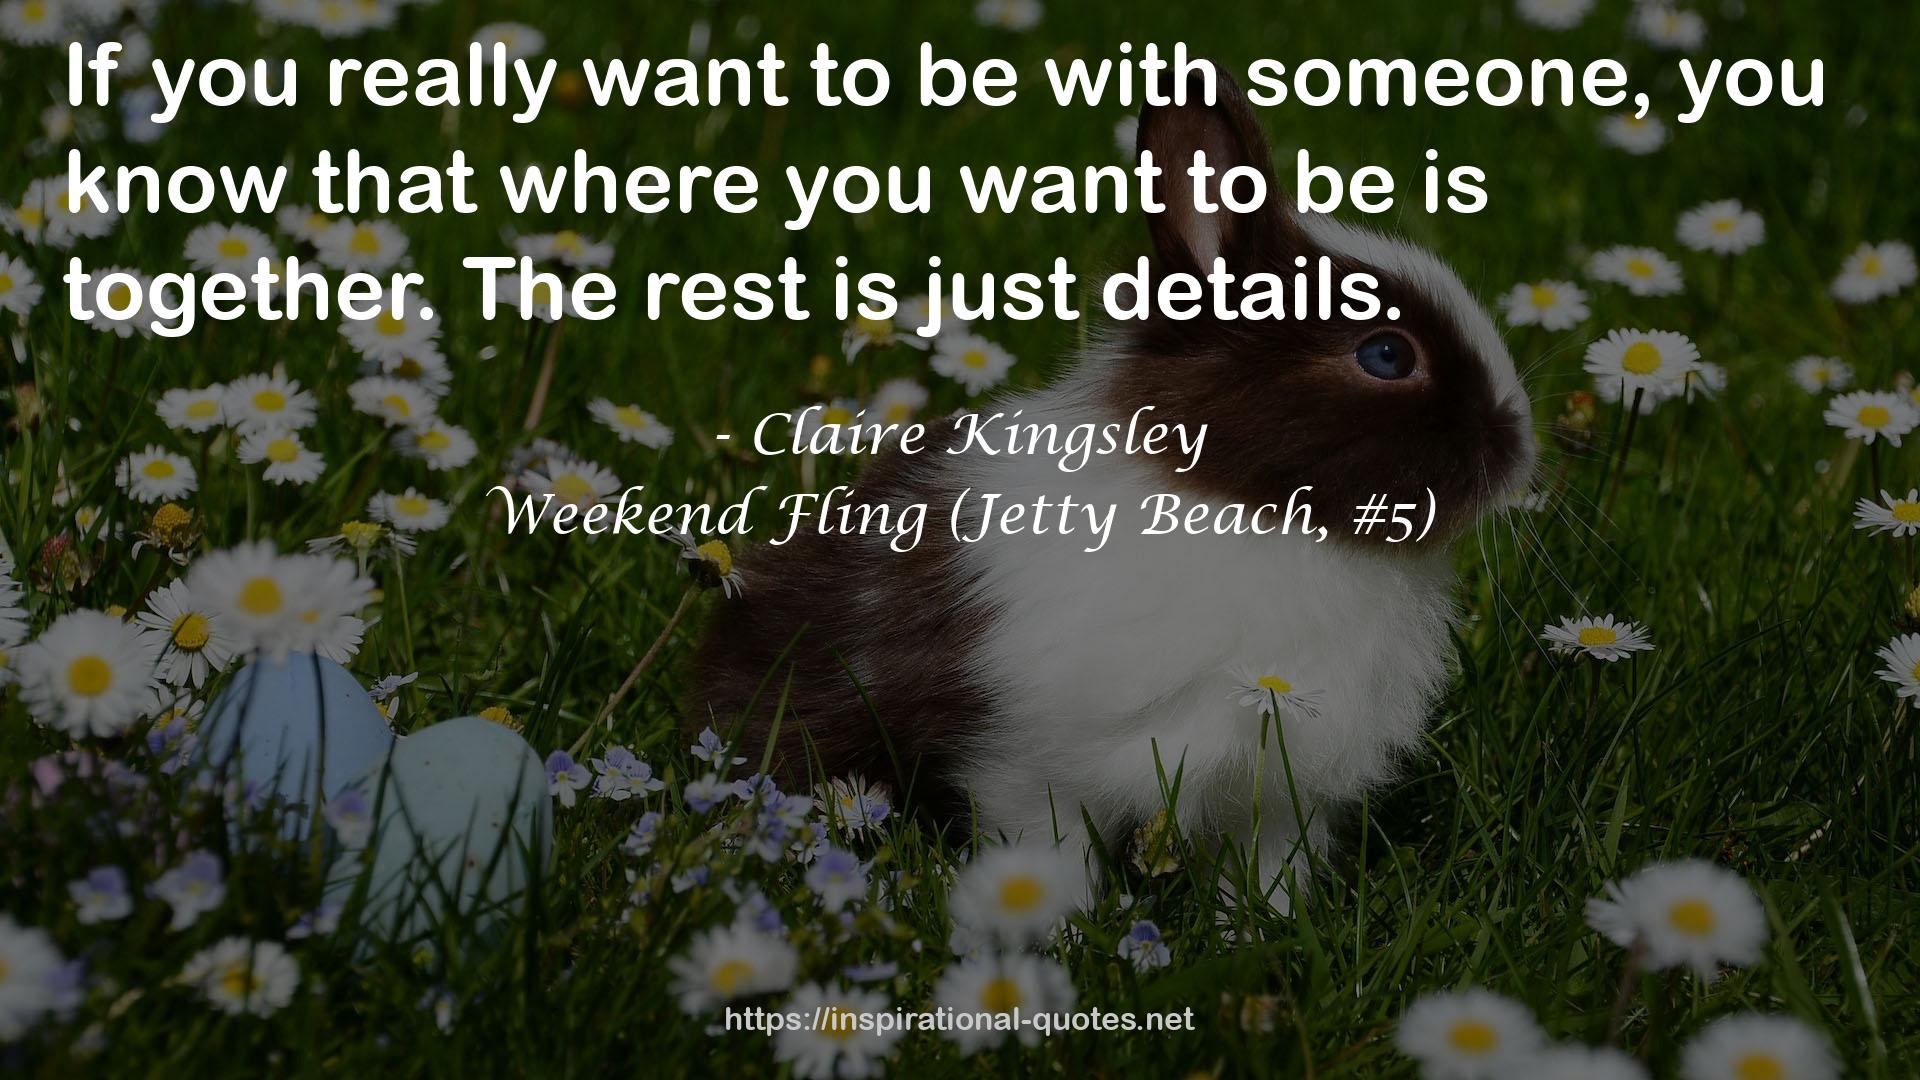 Weekend Fling (Jetty Beach, #5) QUOTES